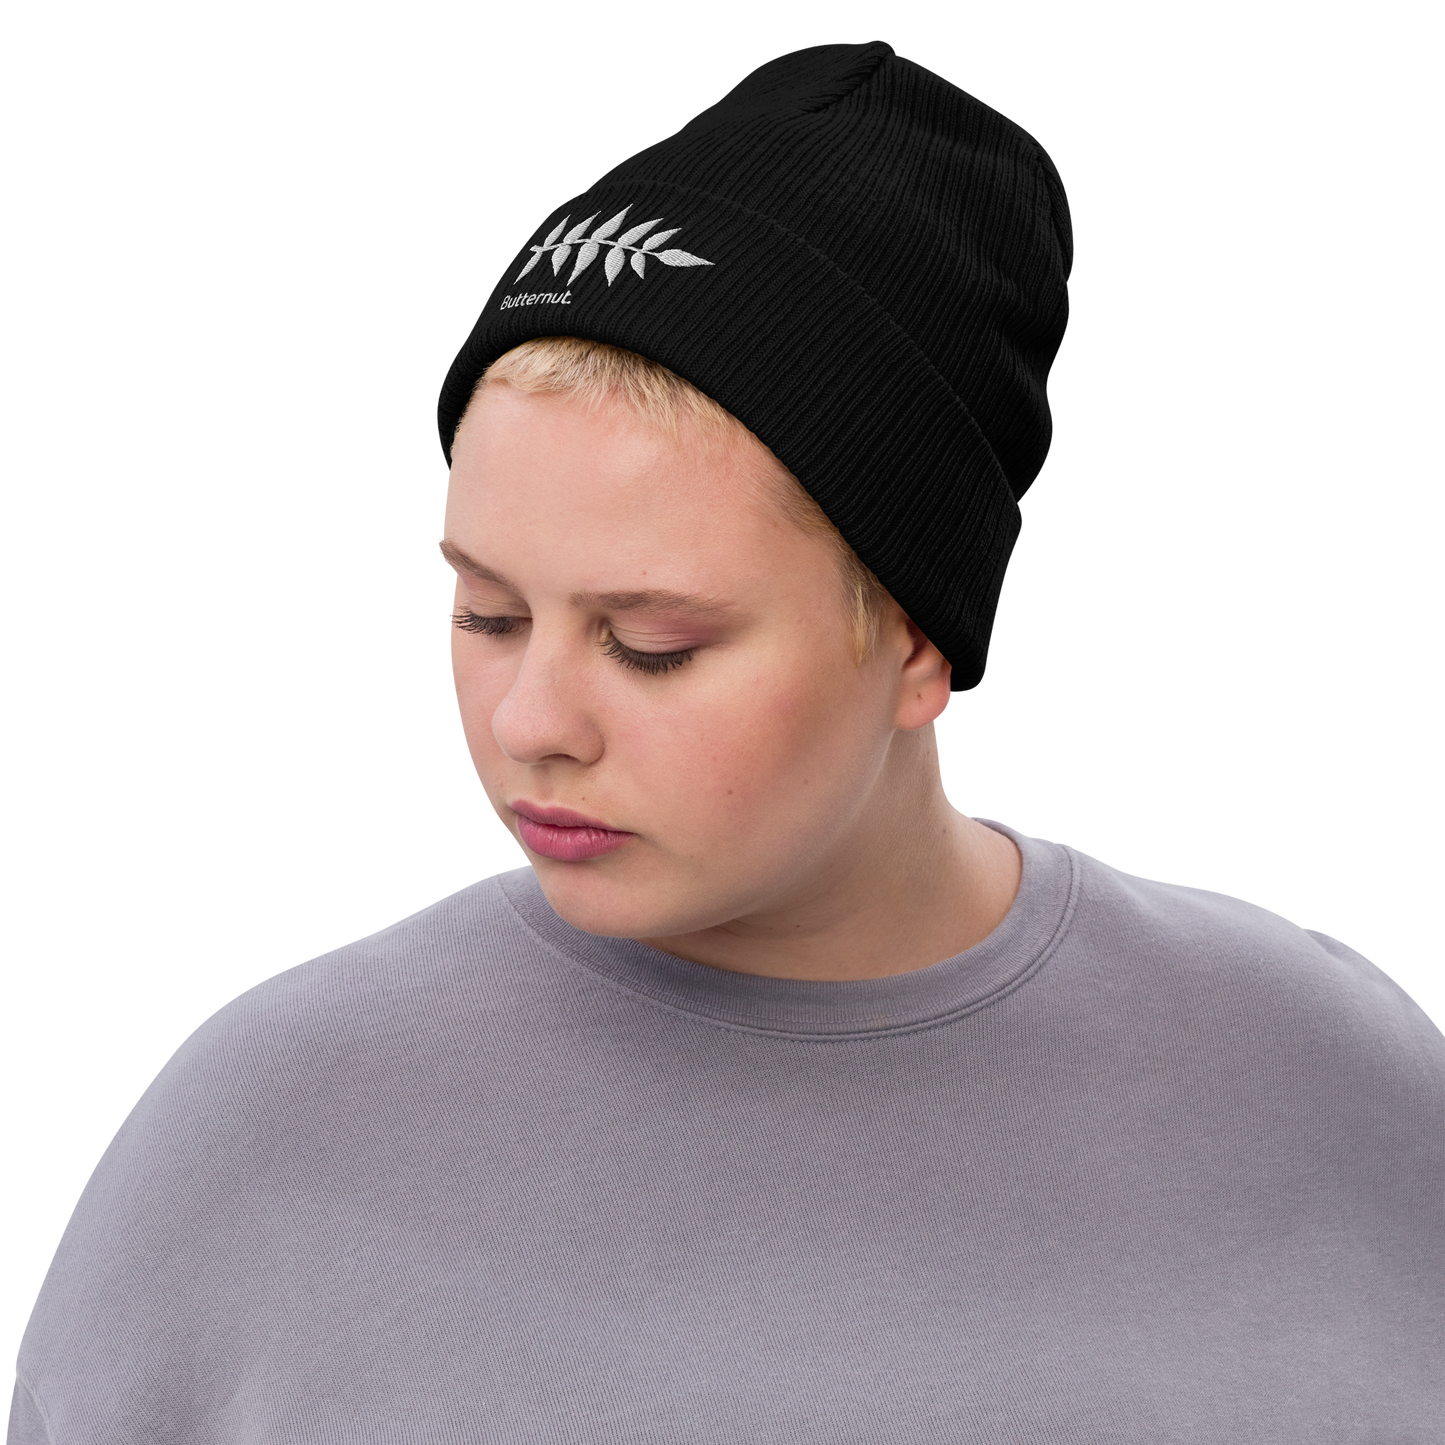 Ribbed knit beanie with Butternut